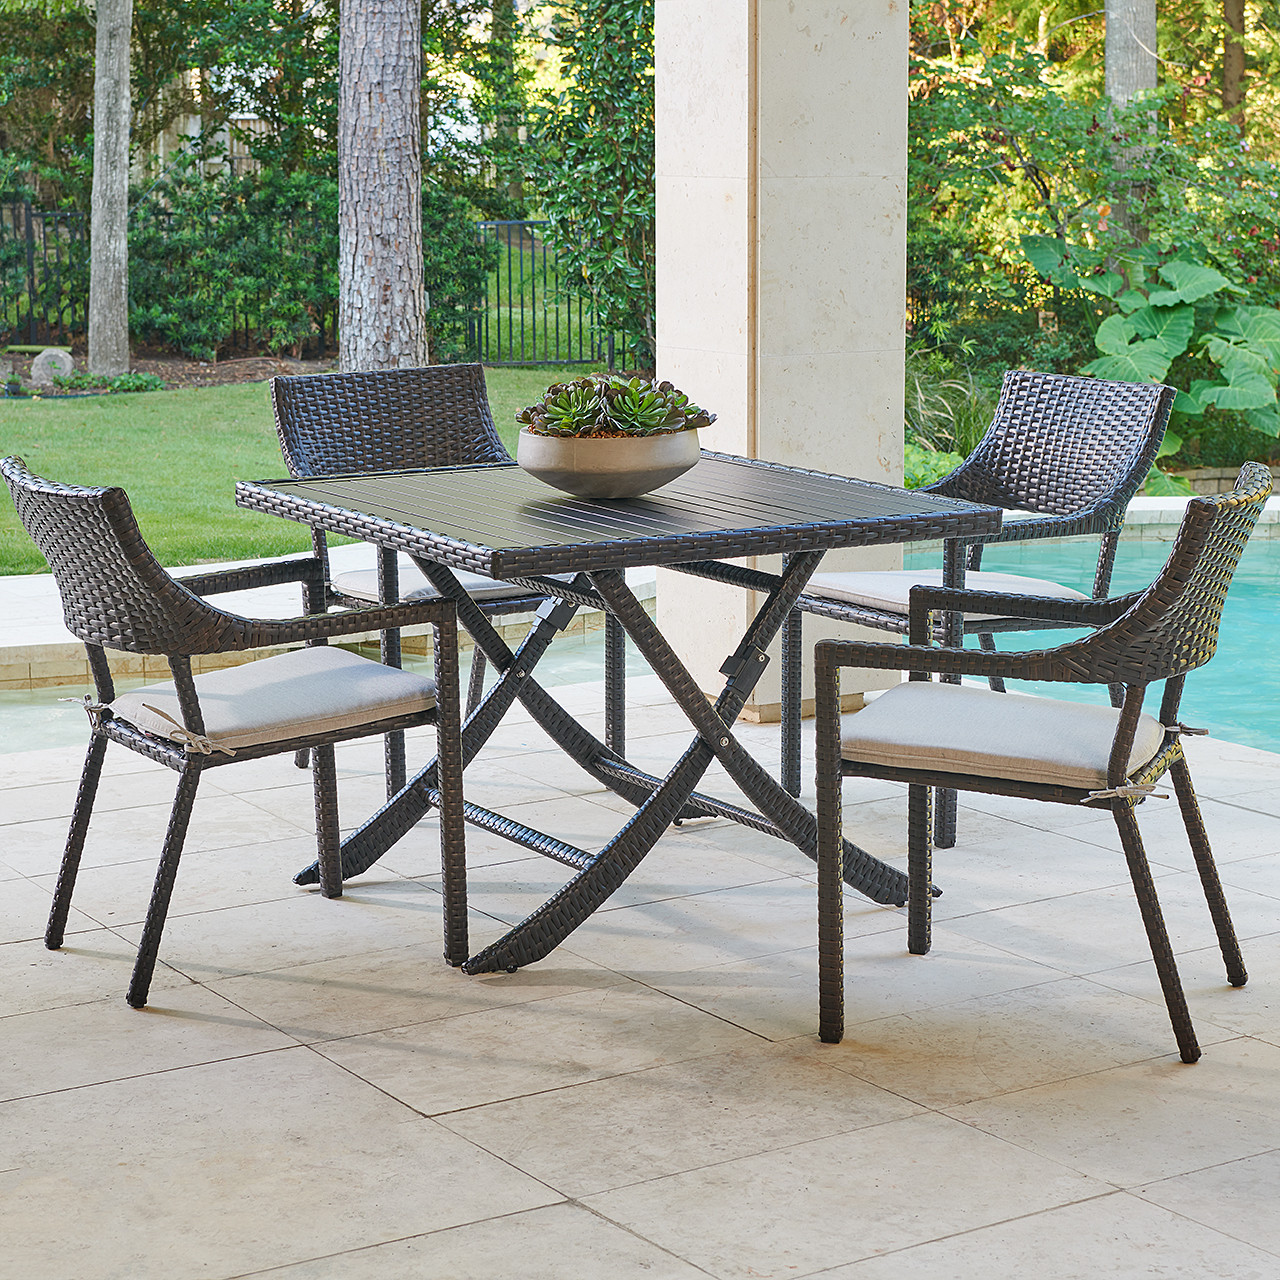 Terrace Dark Elm Outdoor Wicker with Cushions 5 Pc. Dining Set + 41 in. Sq. Table